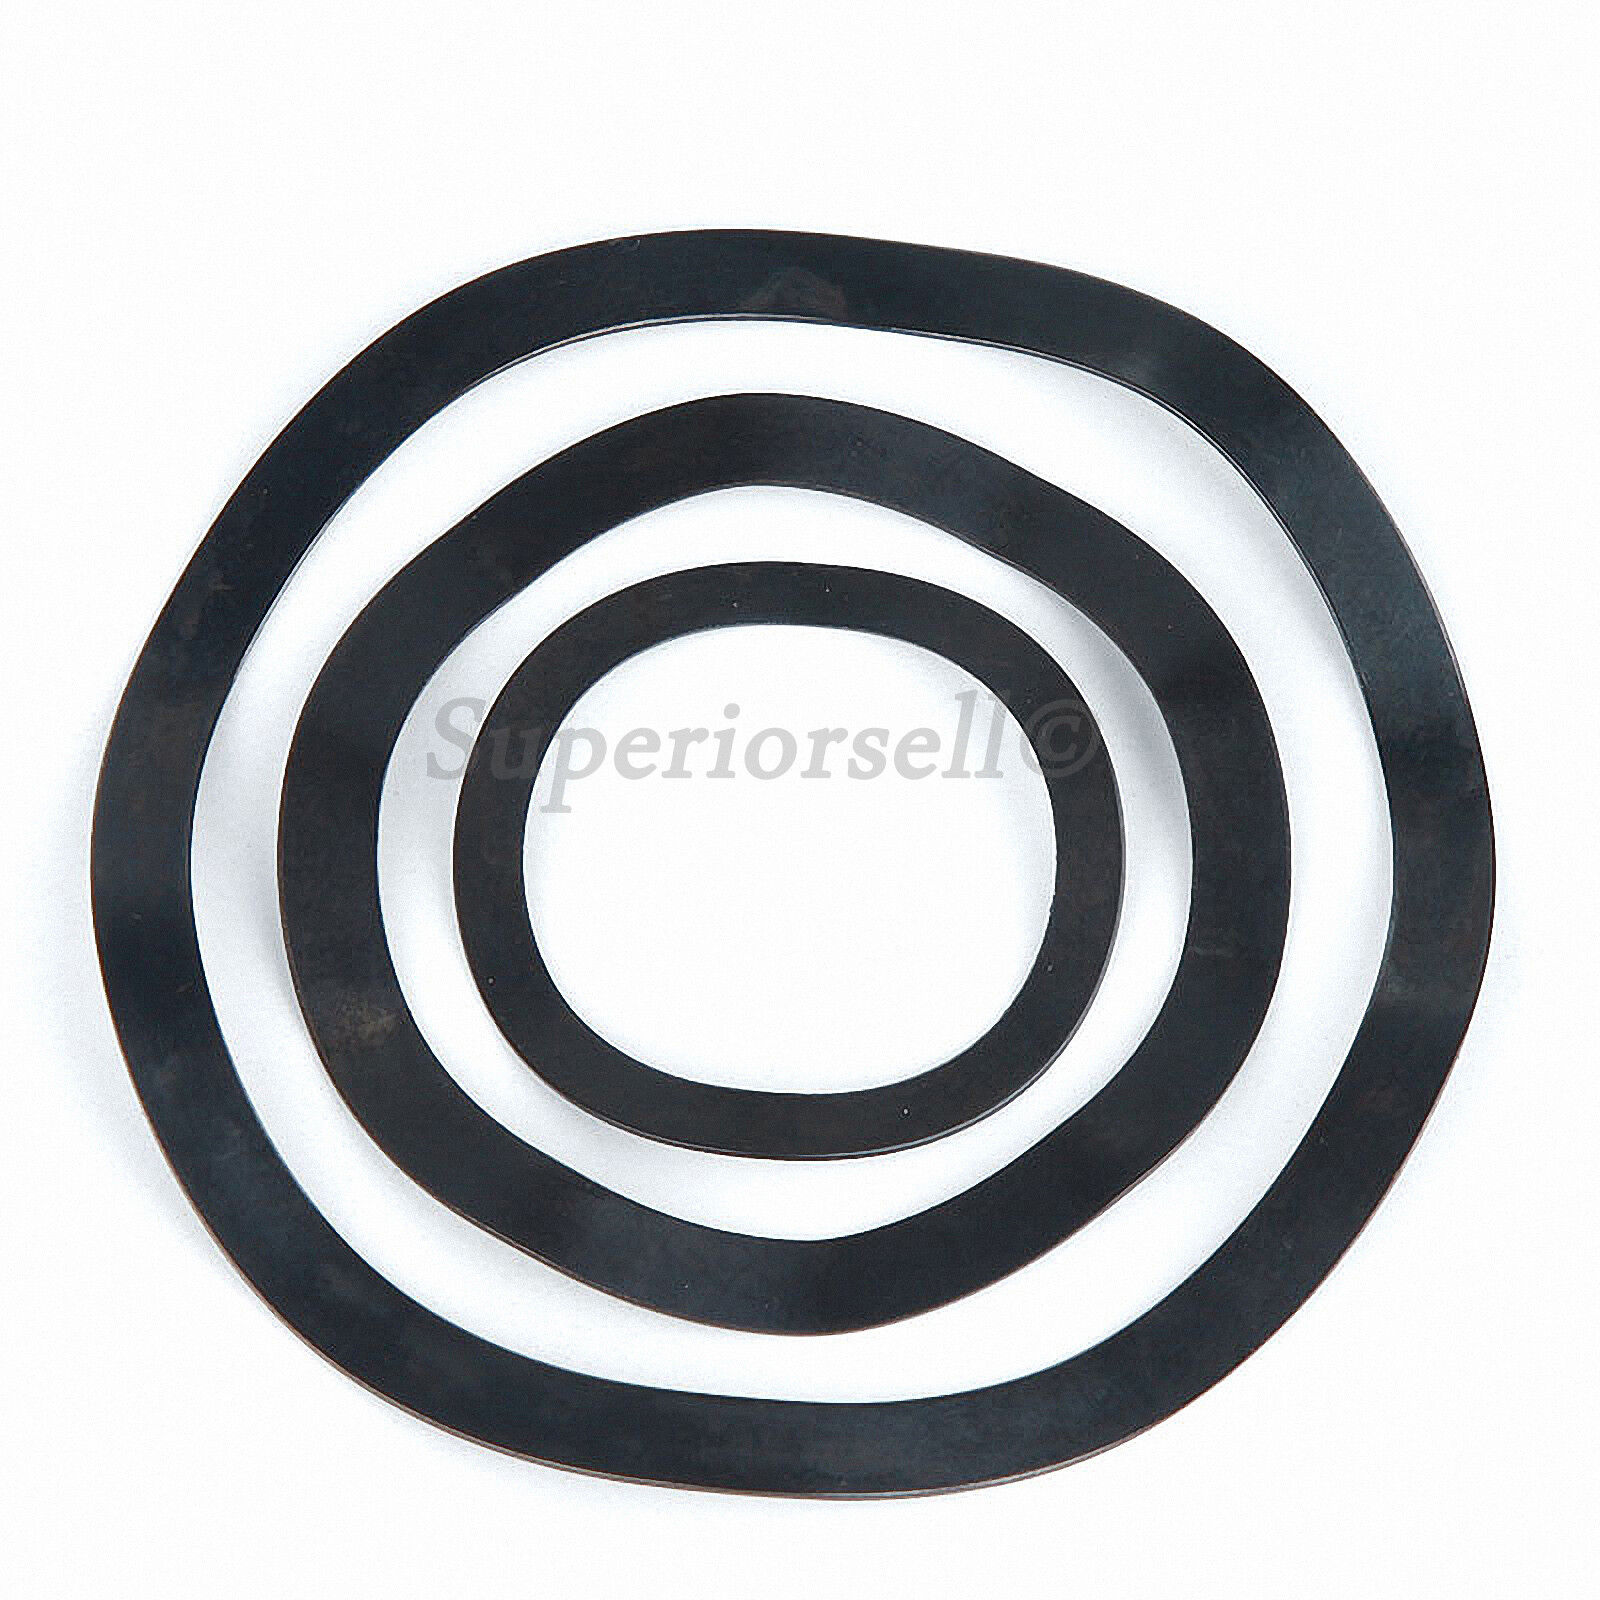 Wave Wavy Spring Crinkle Washers Black Zinc Plated Steel M3-M118 ALL SIZE